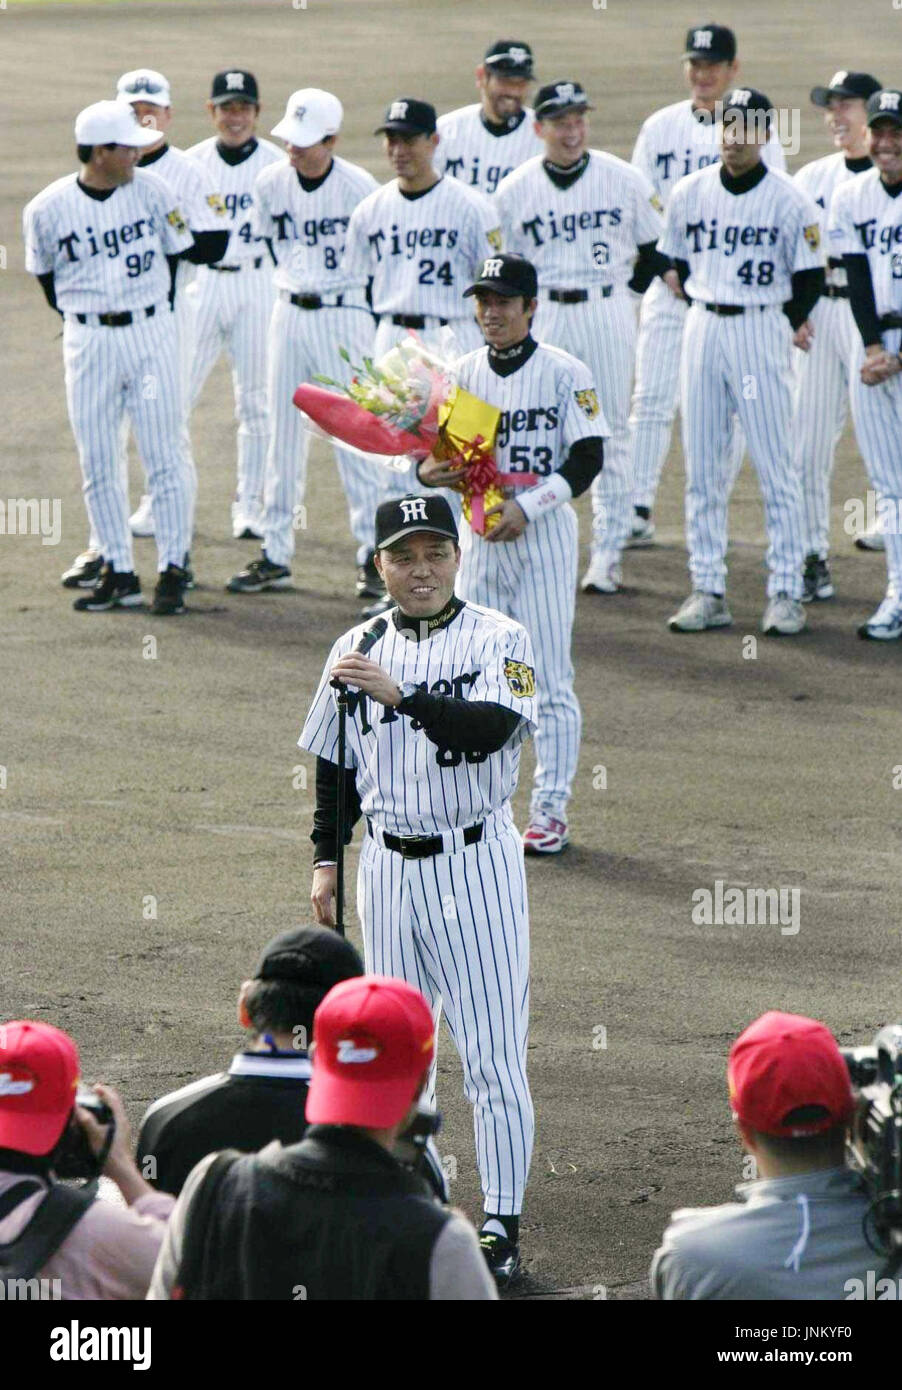 Hanshin Tigers Manager Akinobu Okada Maintains Distance to Help Players Be  Self-Sufficient on Way to Central League Baseball Title - The Japan News